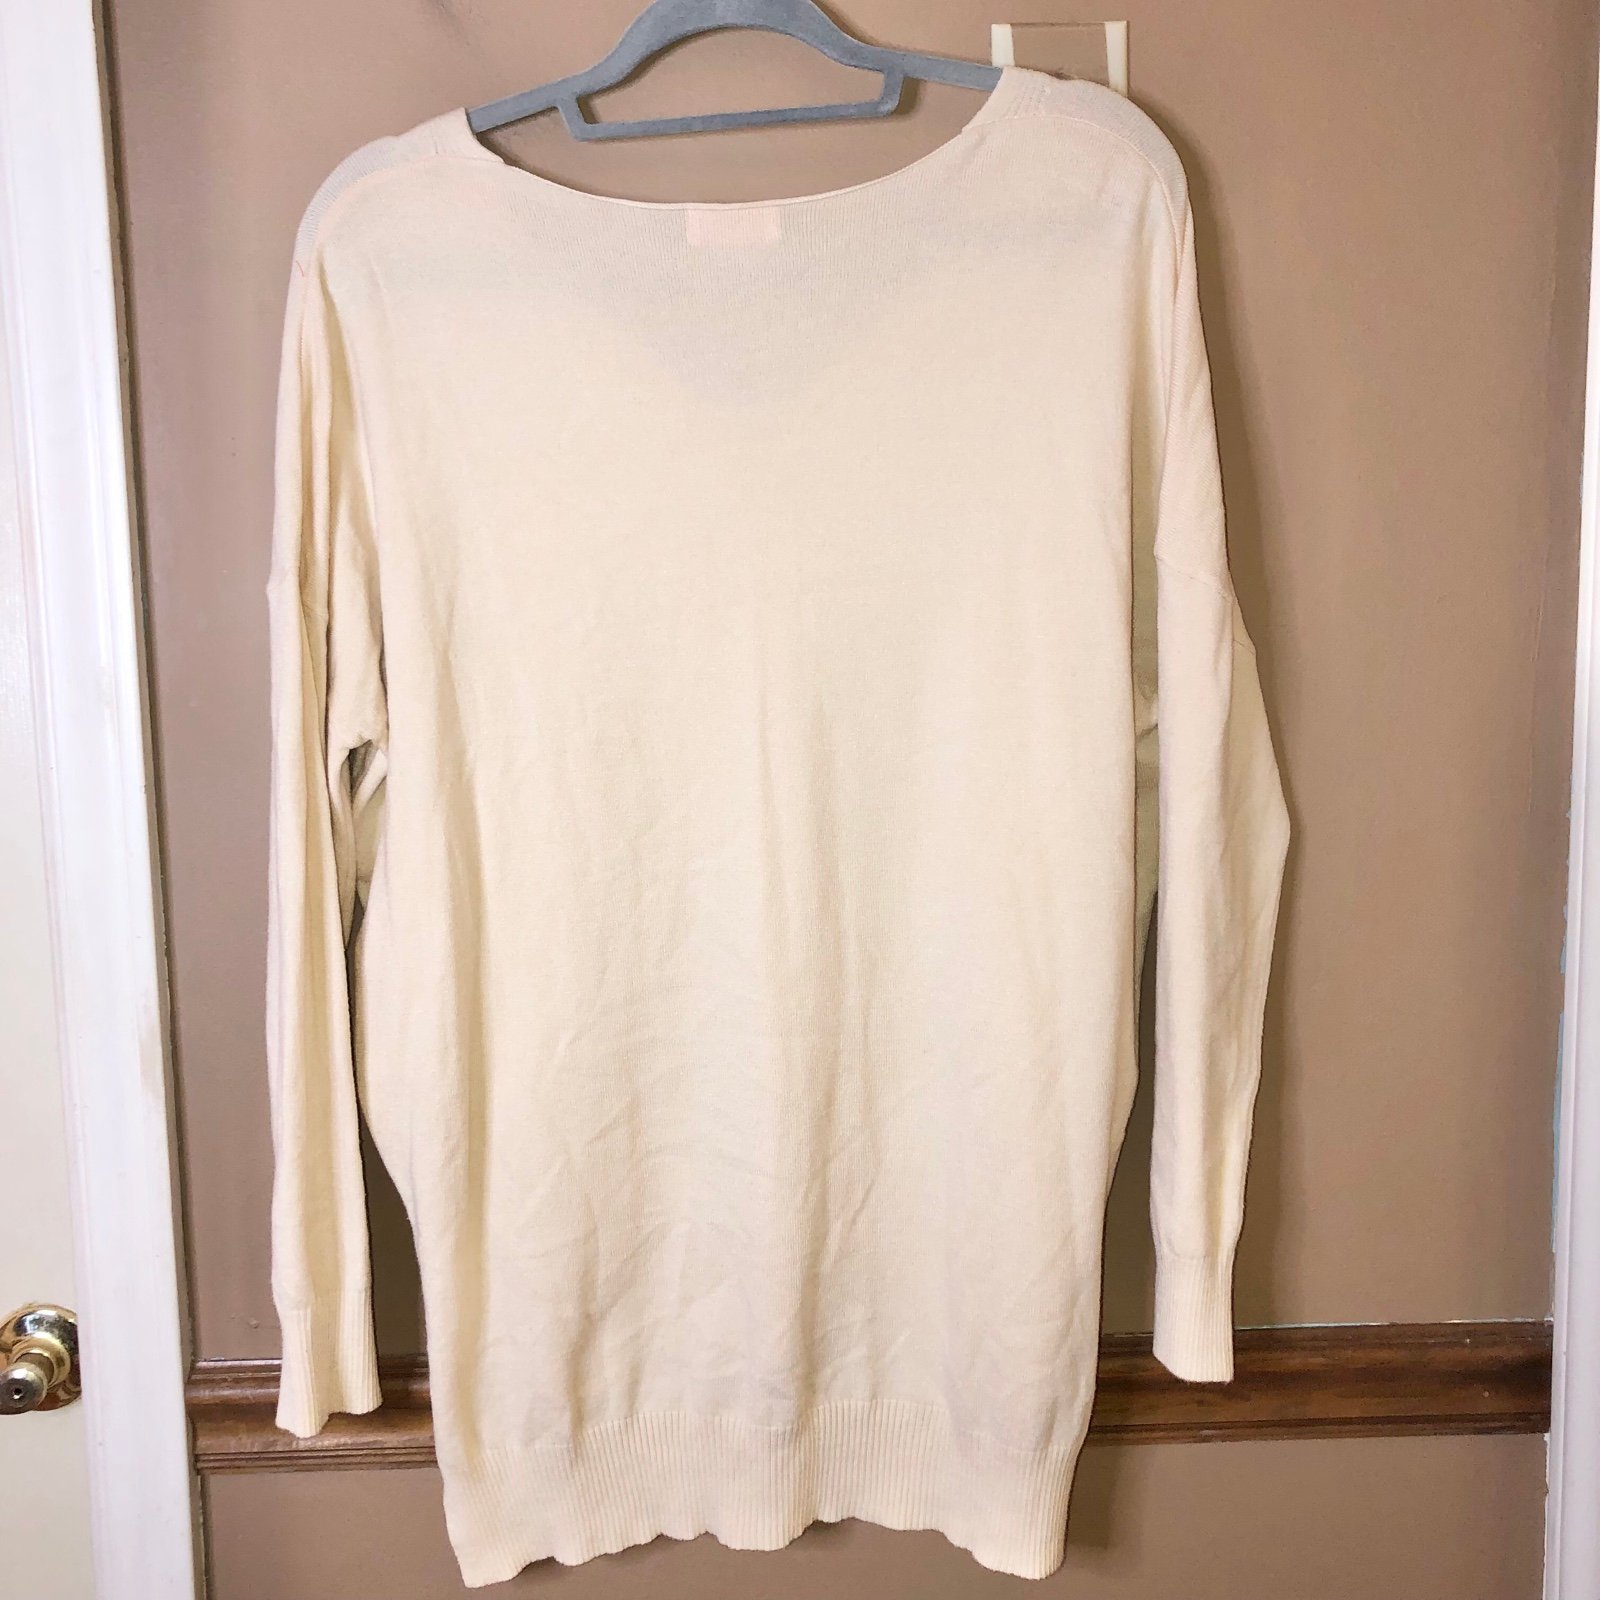 Wholesale price Pink lily V Neck High Low Dolman Sweater Cream Medium GjnmlBb20 all for you